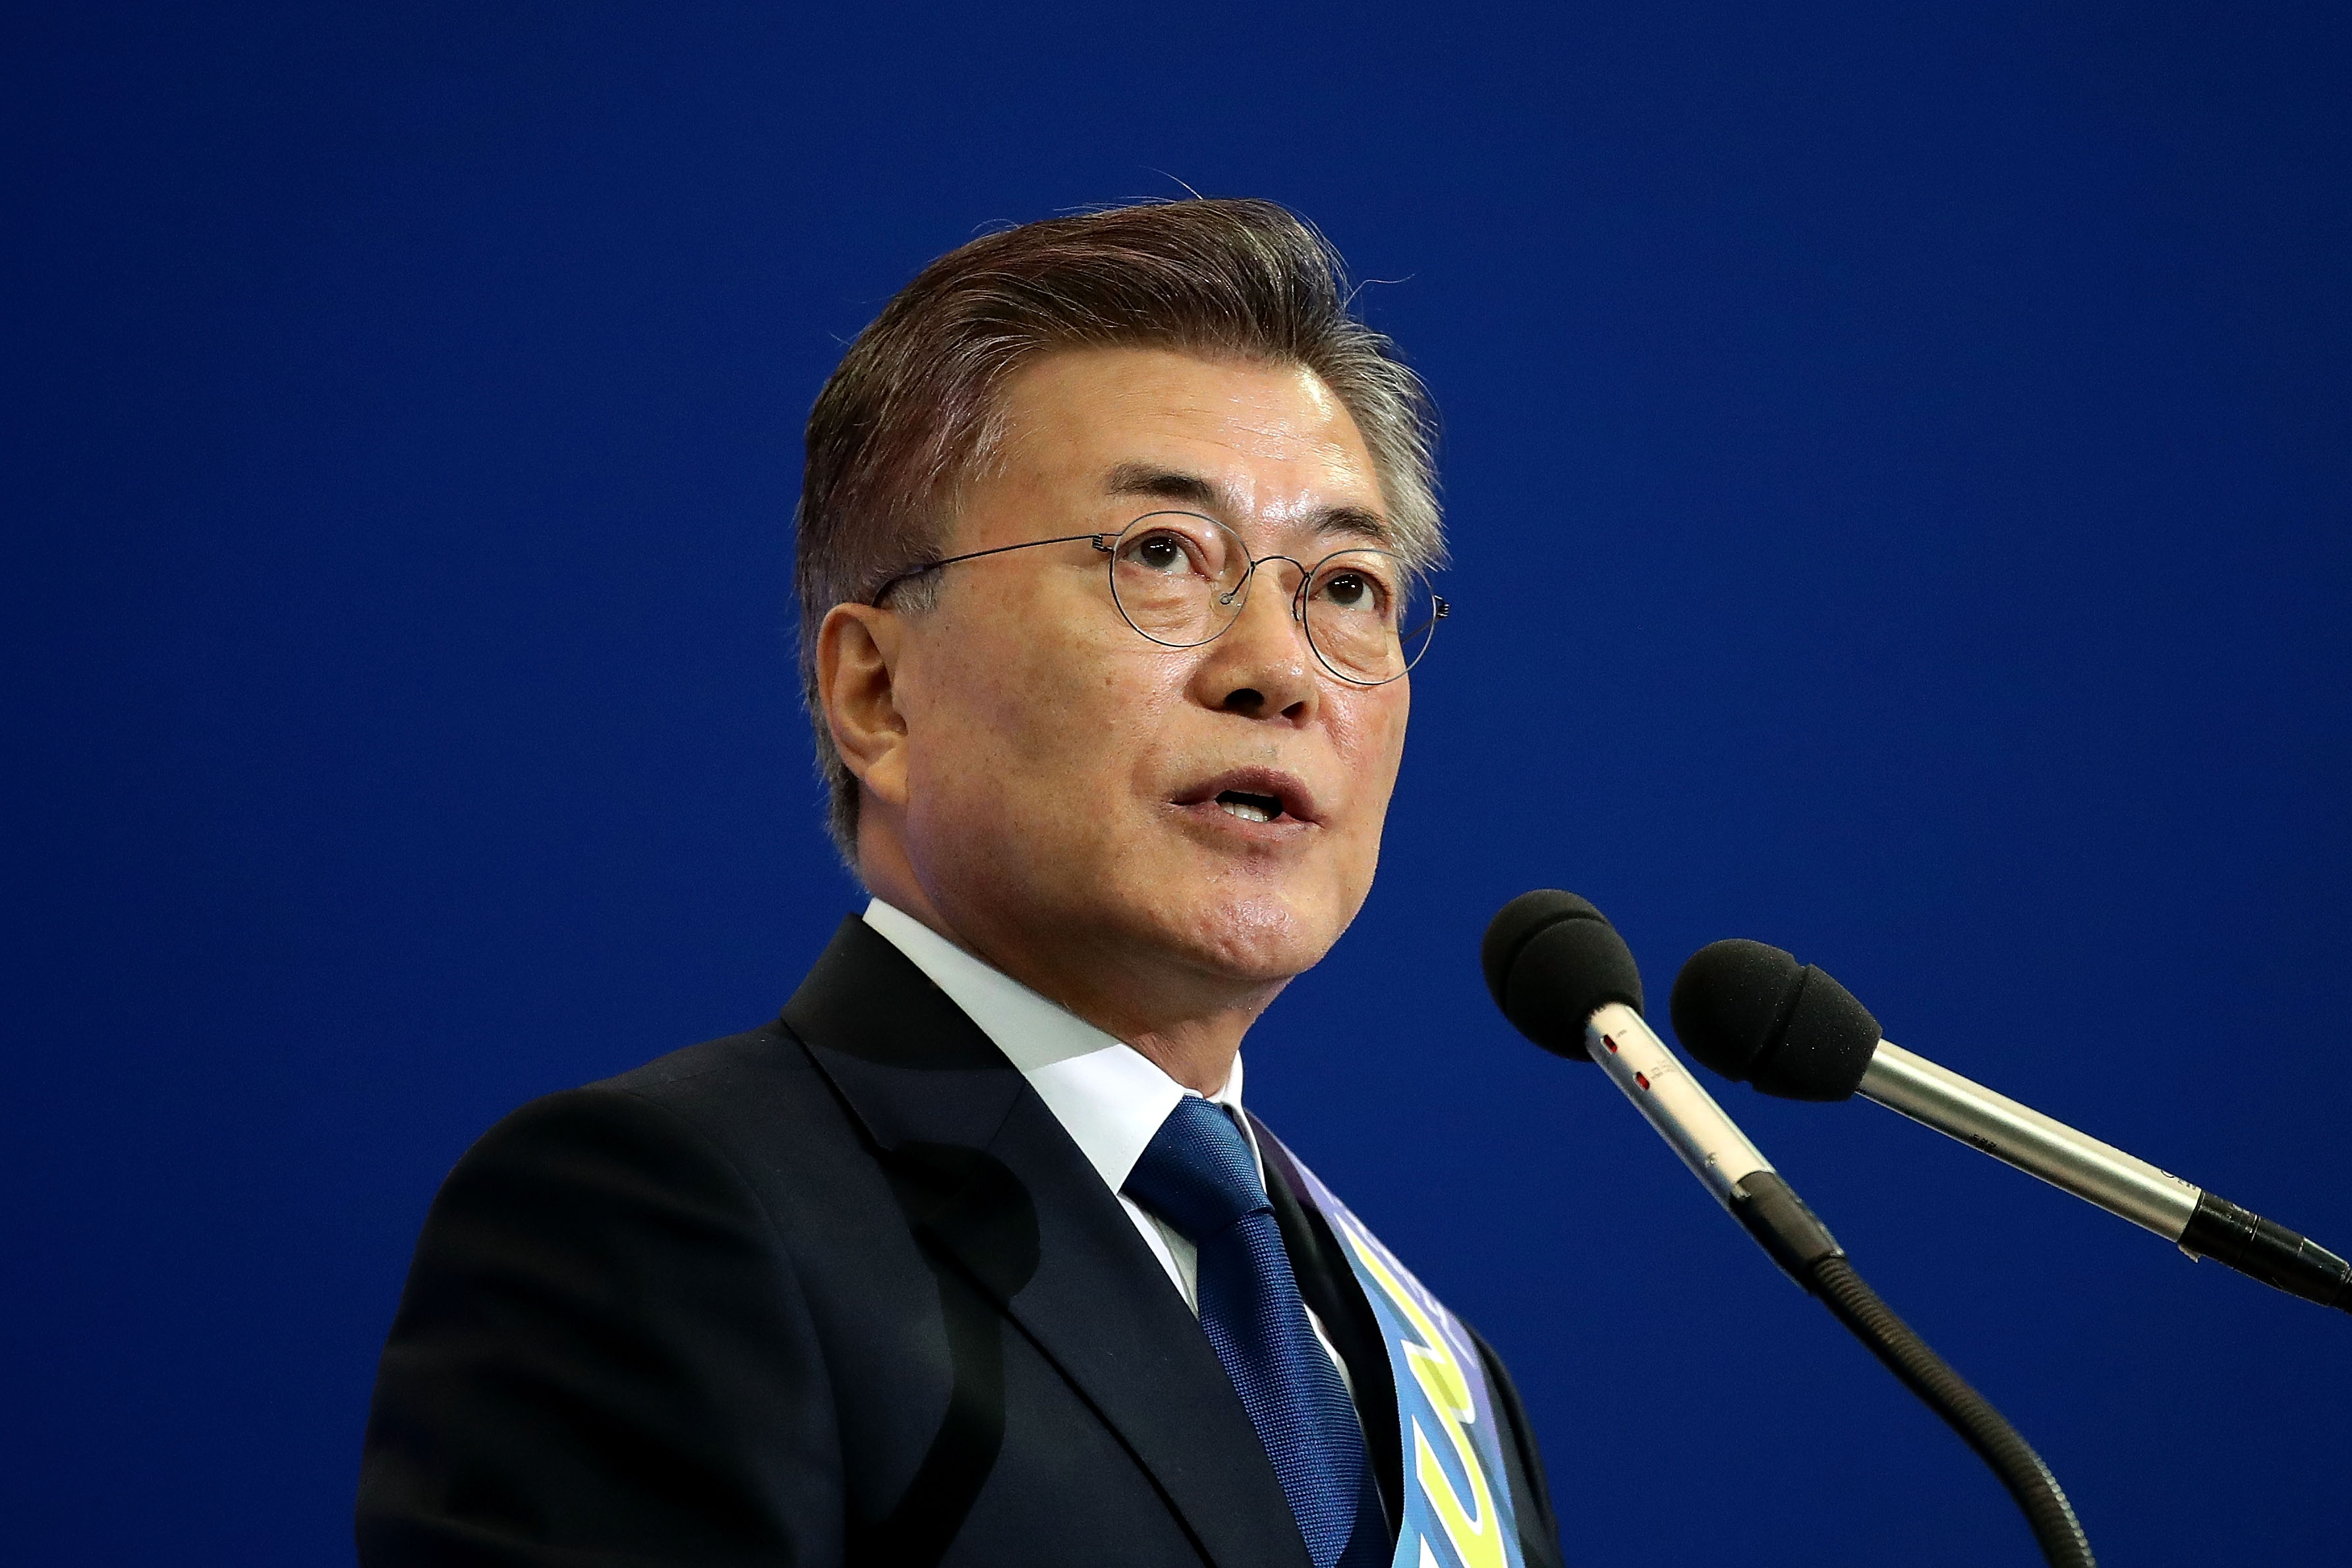 Moon Jae-In gives a speech in Seoul, South Korea, on April 3, 2017. (Chung Sung-Jun—Getty Images)